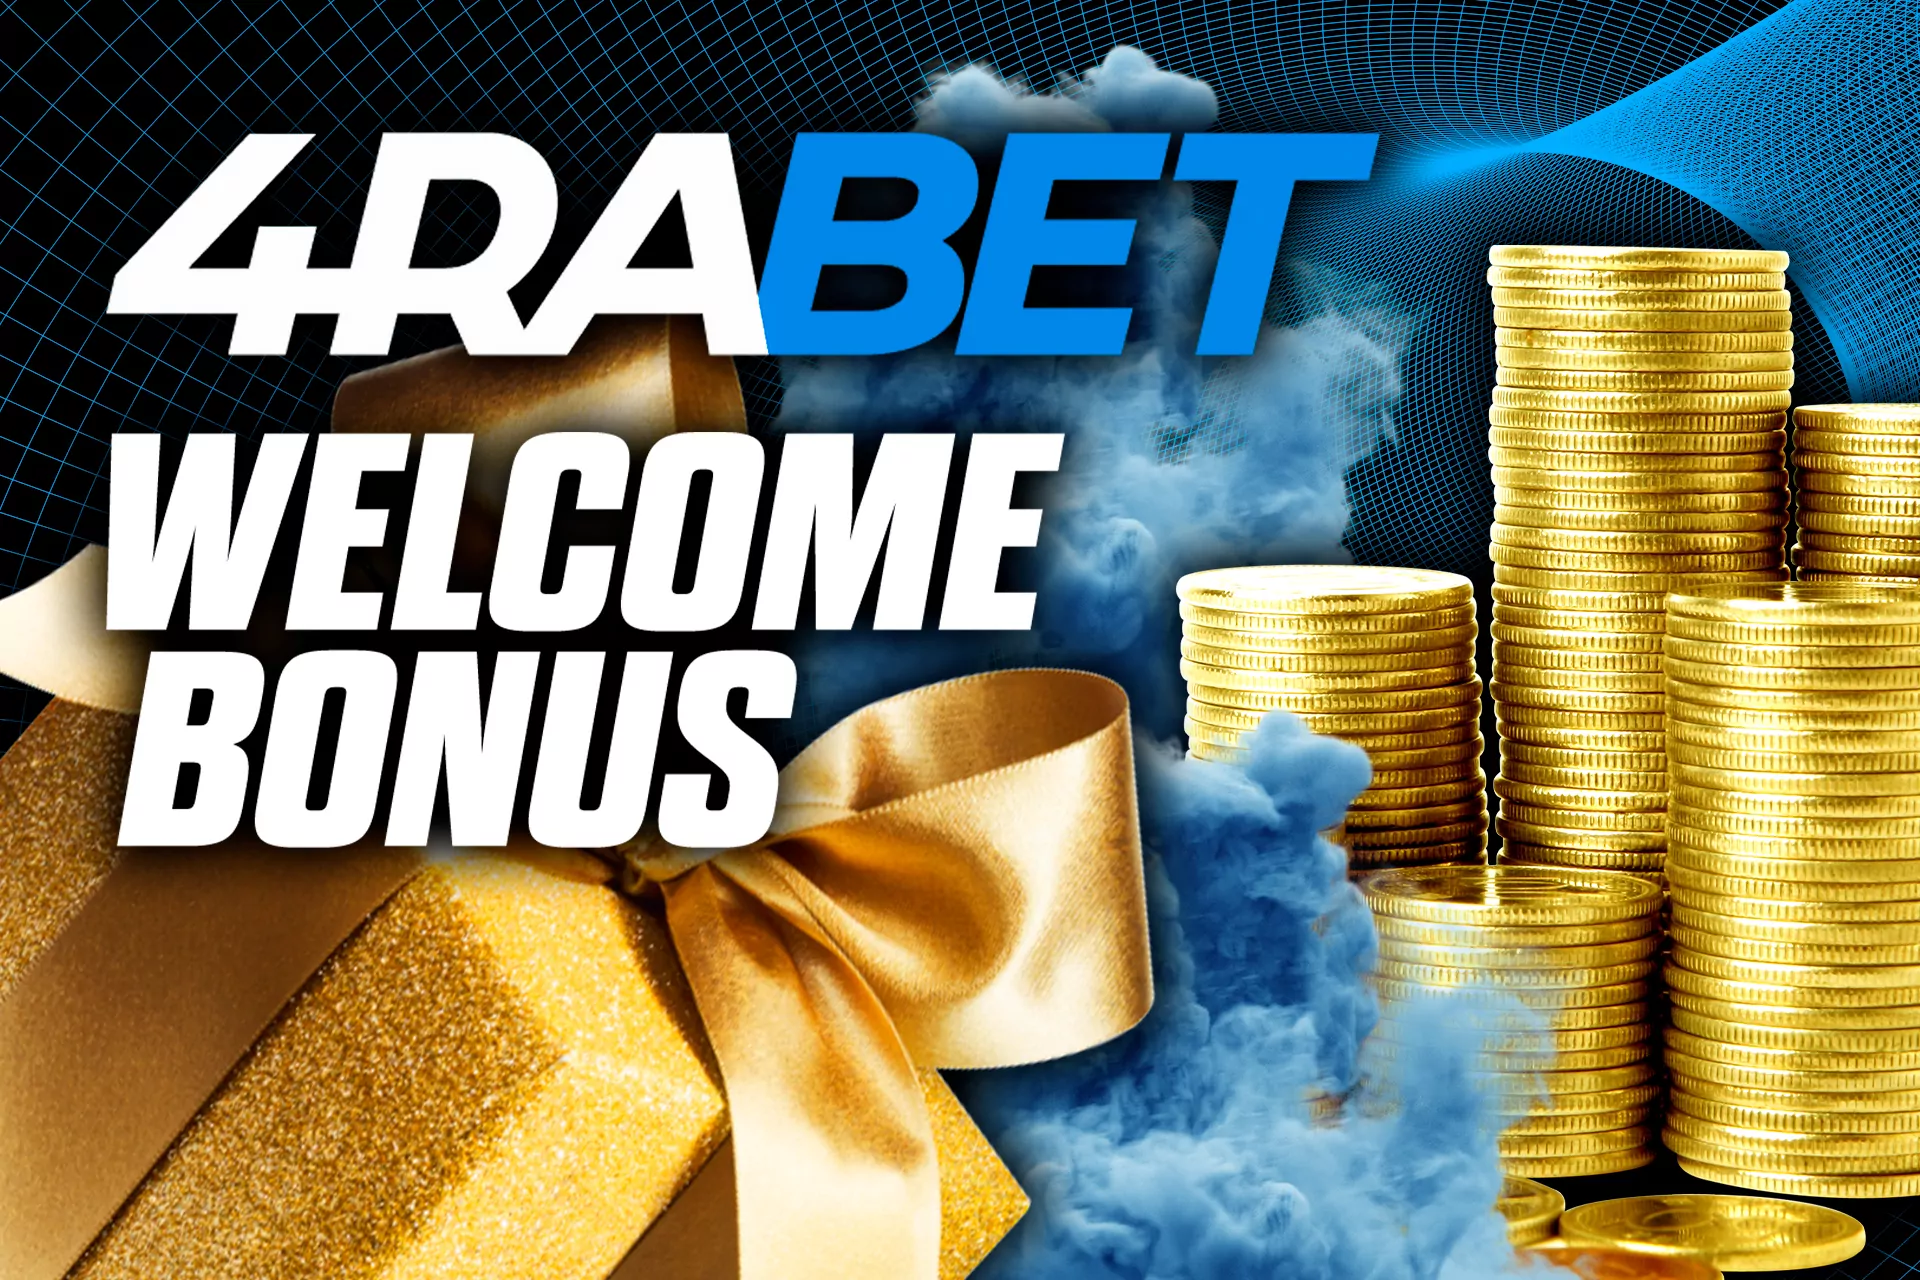 For new users, at 4rabet there is a welcome offer of a bonus on the first deposit.